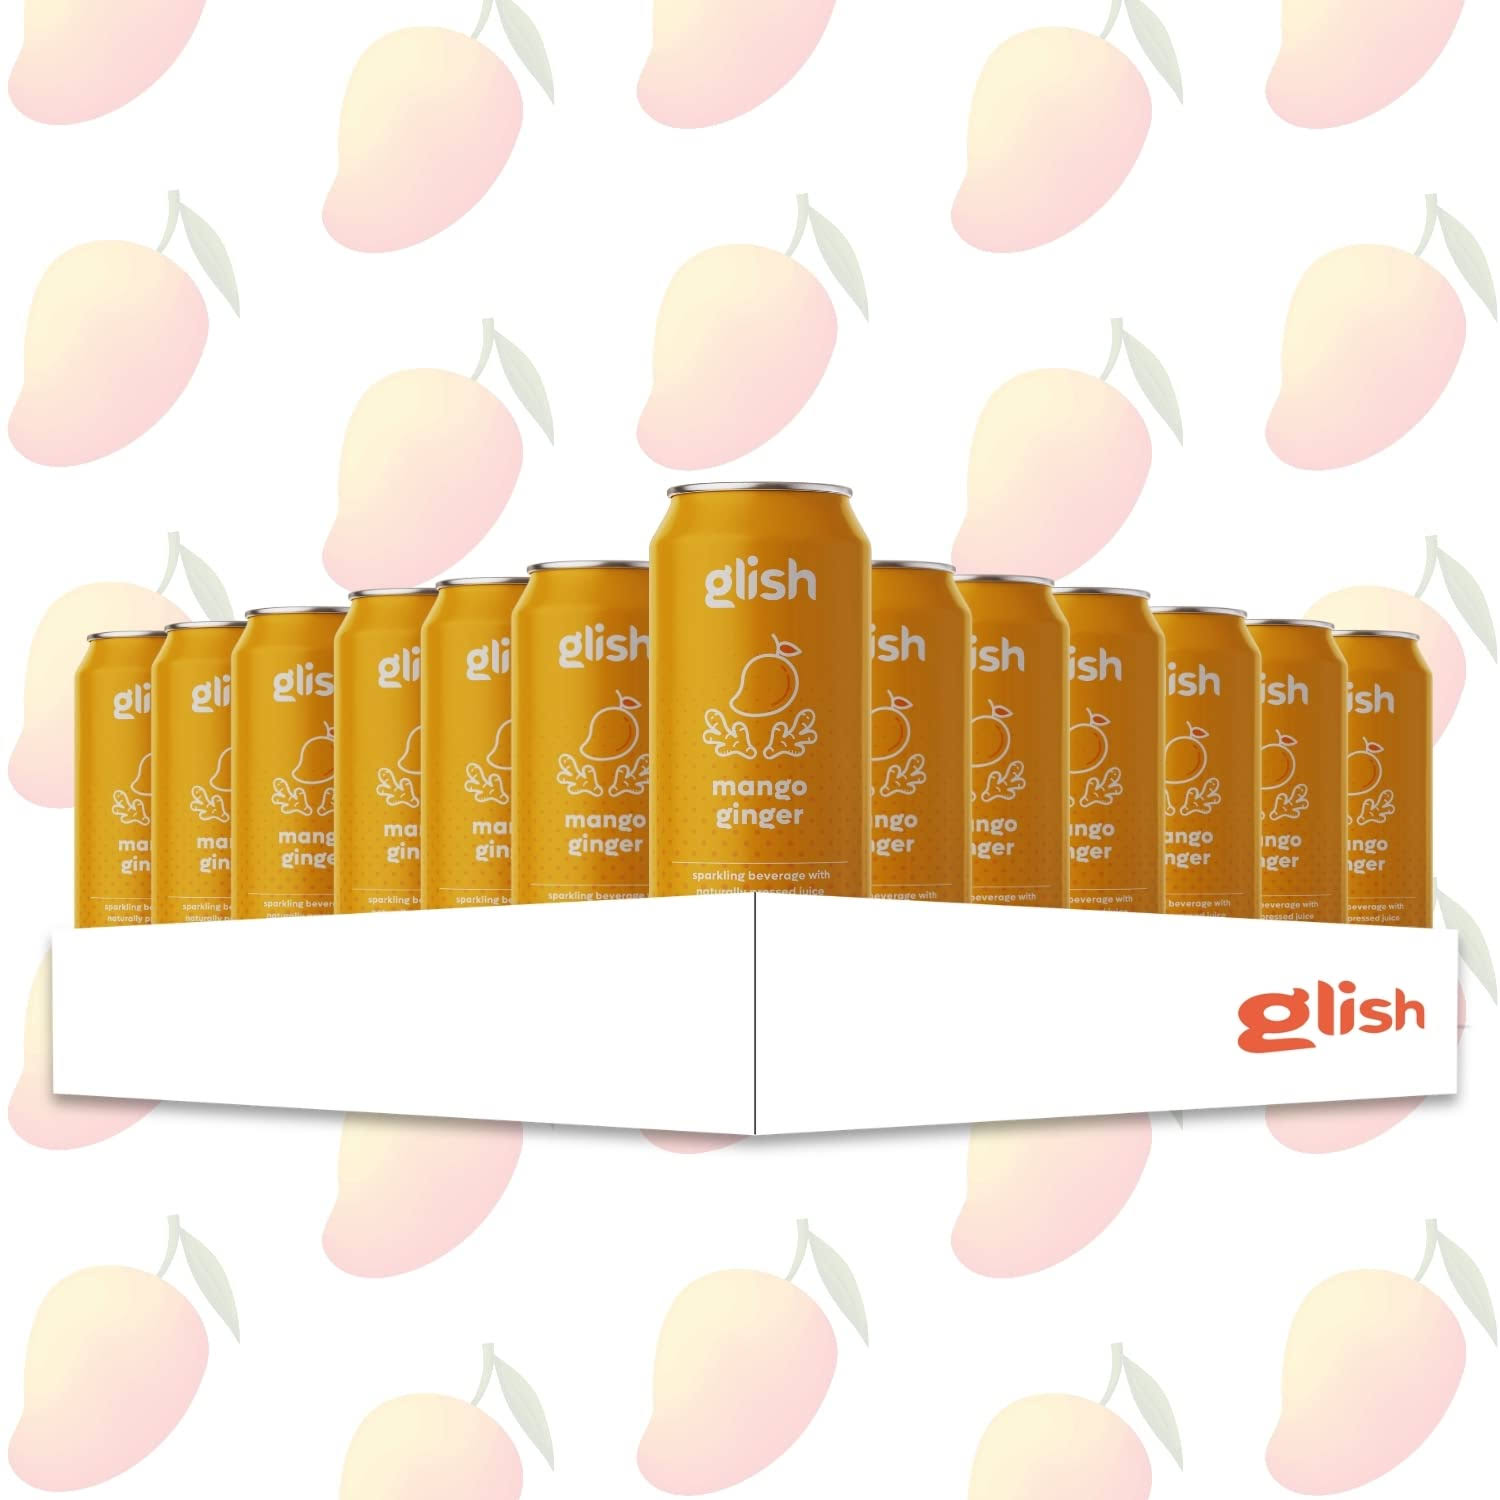 Glish Mango Ginger - Functional Sparkling Water, Aids Immune & Gut Health, Anti-Inflammatory and Anti-Oxidants, with Naturally Pressed Ginger Juice